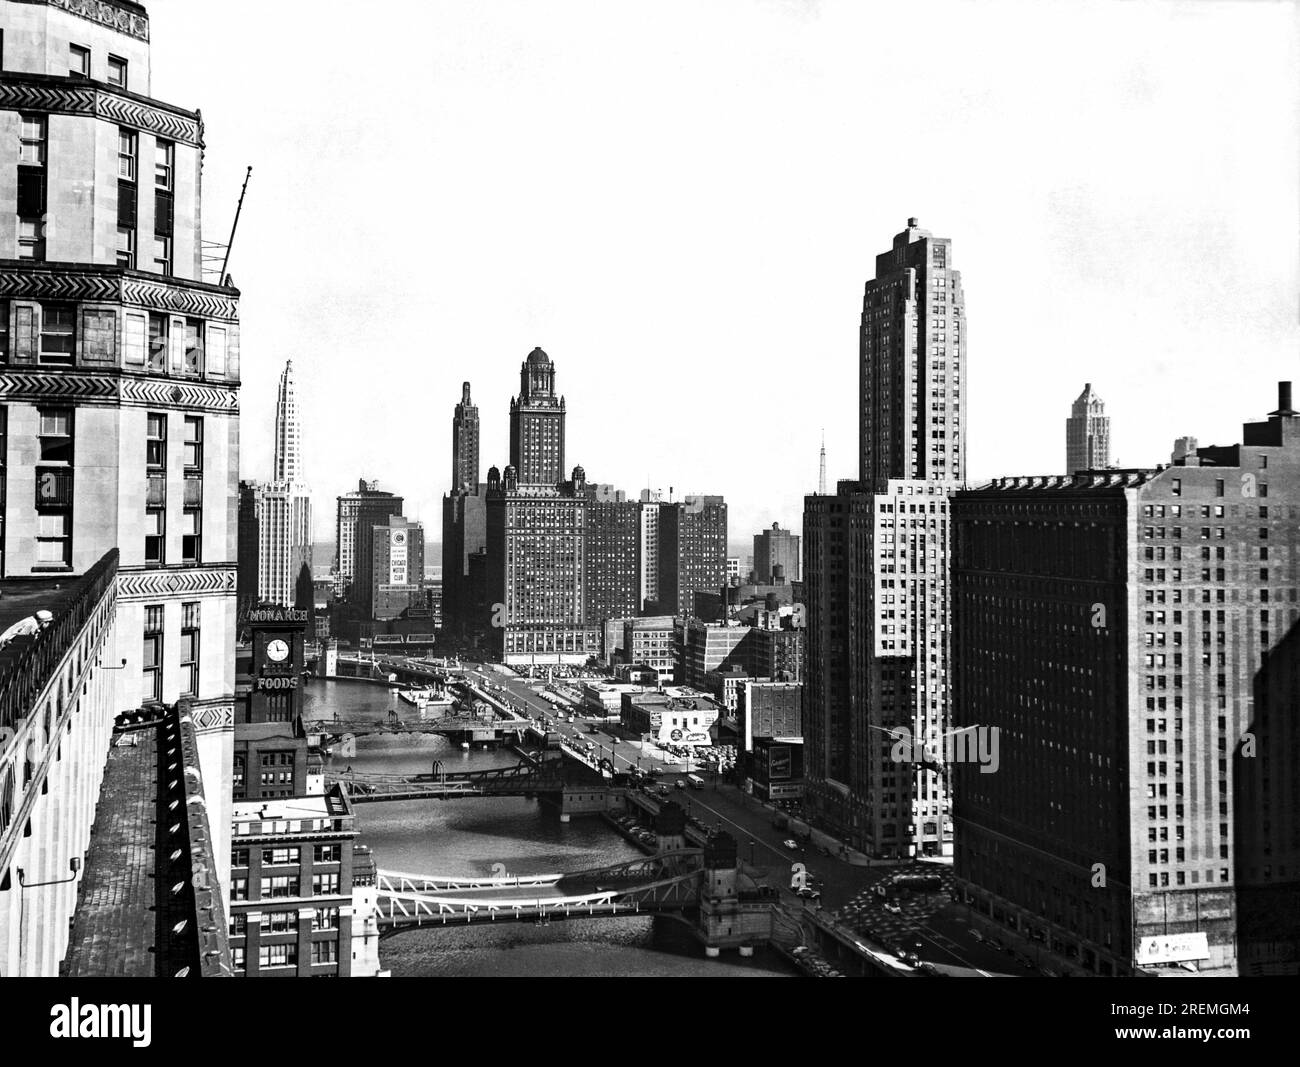 Chicago, Illinois: October 30, 1946. Looking east down the Chicago River from the top of the Merchandise Mart. Stock Photo